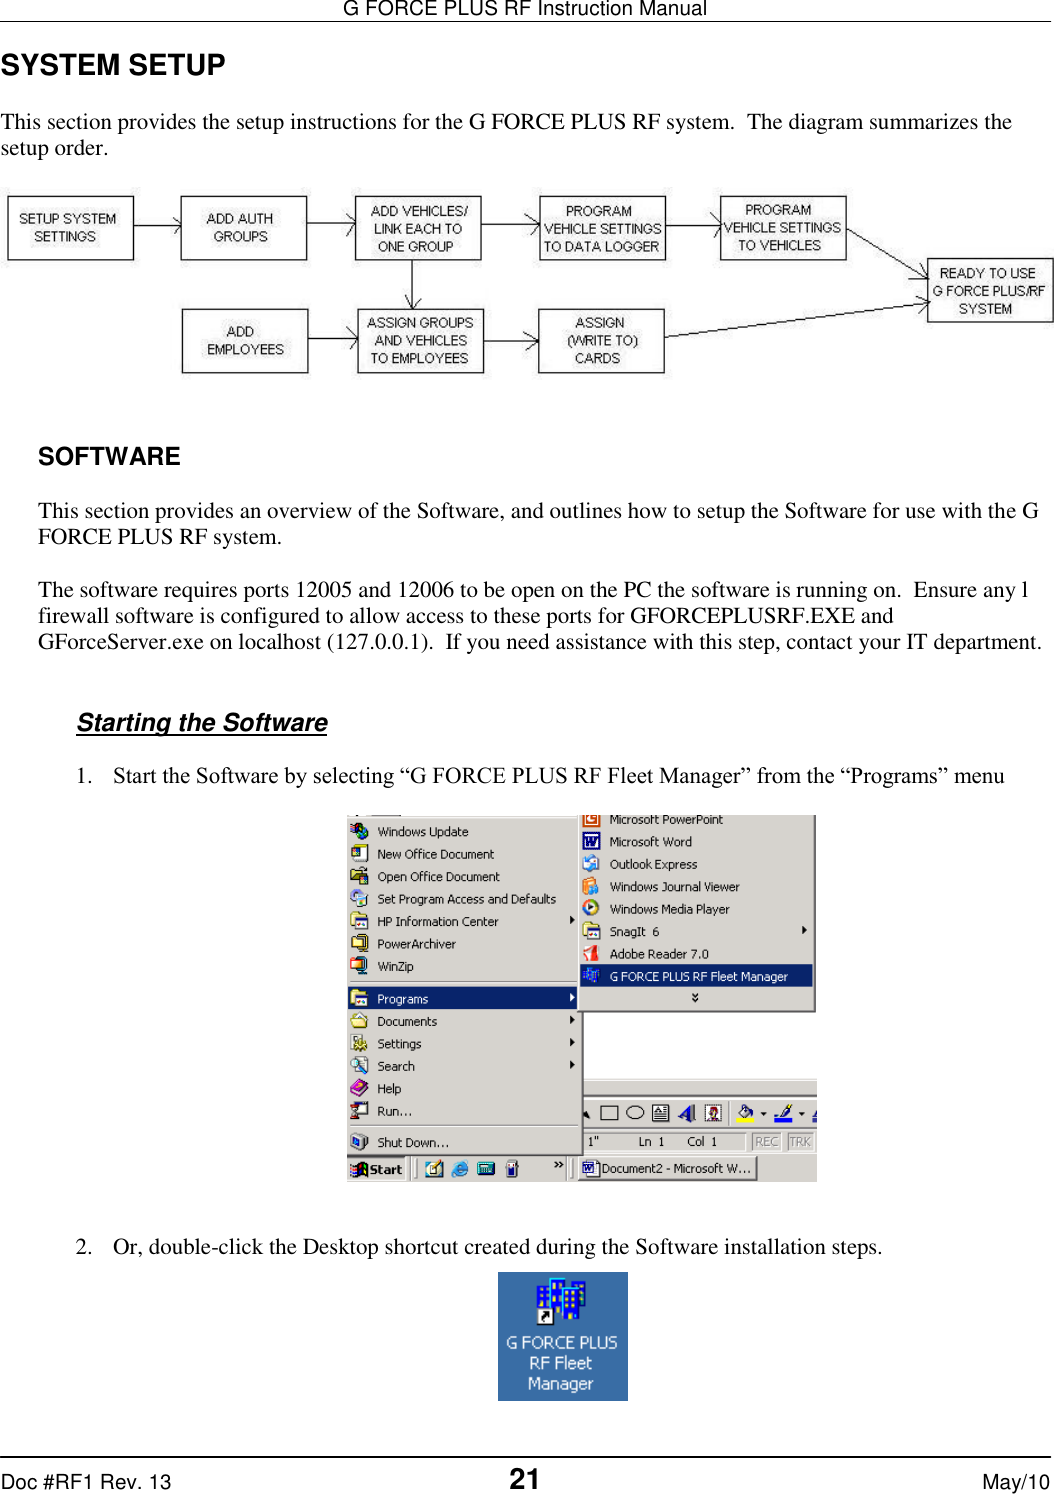 G FORCE PLUS RF Instruction Manual   Doc #RF1 Rev. 13  21 May/10 SYSTEM SETUP  This section provides the setup instructions for the G FORCE PLUS RF system.  The diagram summarizes the setup order.     SOFTWARE  This section provides an overview of the Software, and outlines how to setup the Software for use with the G FORCE PLUS RF system.  The software requires ports 12005 and 12006 to be open on the PC the software is running on.  Ensure any l firewall software is configured to allow access to these ports for GFORCEPLUSRF.EXE and GForceServer.exe on localhost (127.0.0.1).  If you need assistance with this step, contact your IT department.   Starting the Software   1. Start the Software by selecting “G FORCE PLUS RF Fleet Manager” from the “Programs” menu     2. Or, double-click the Desktop shortcut created during the Software installation steps.   